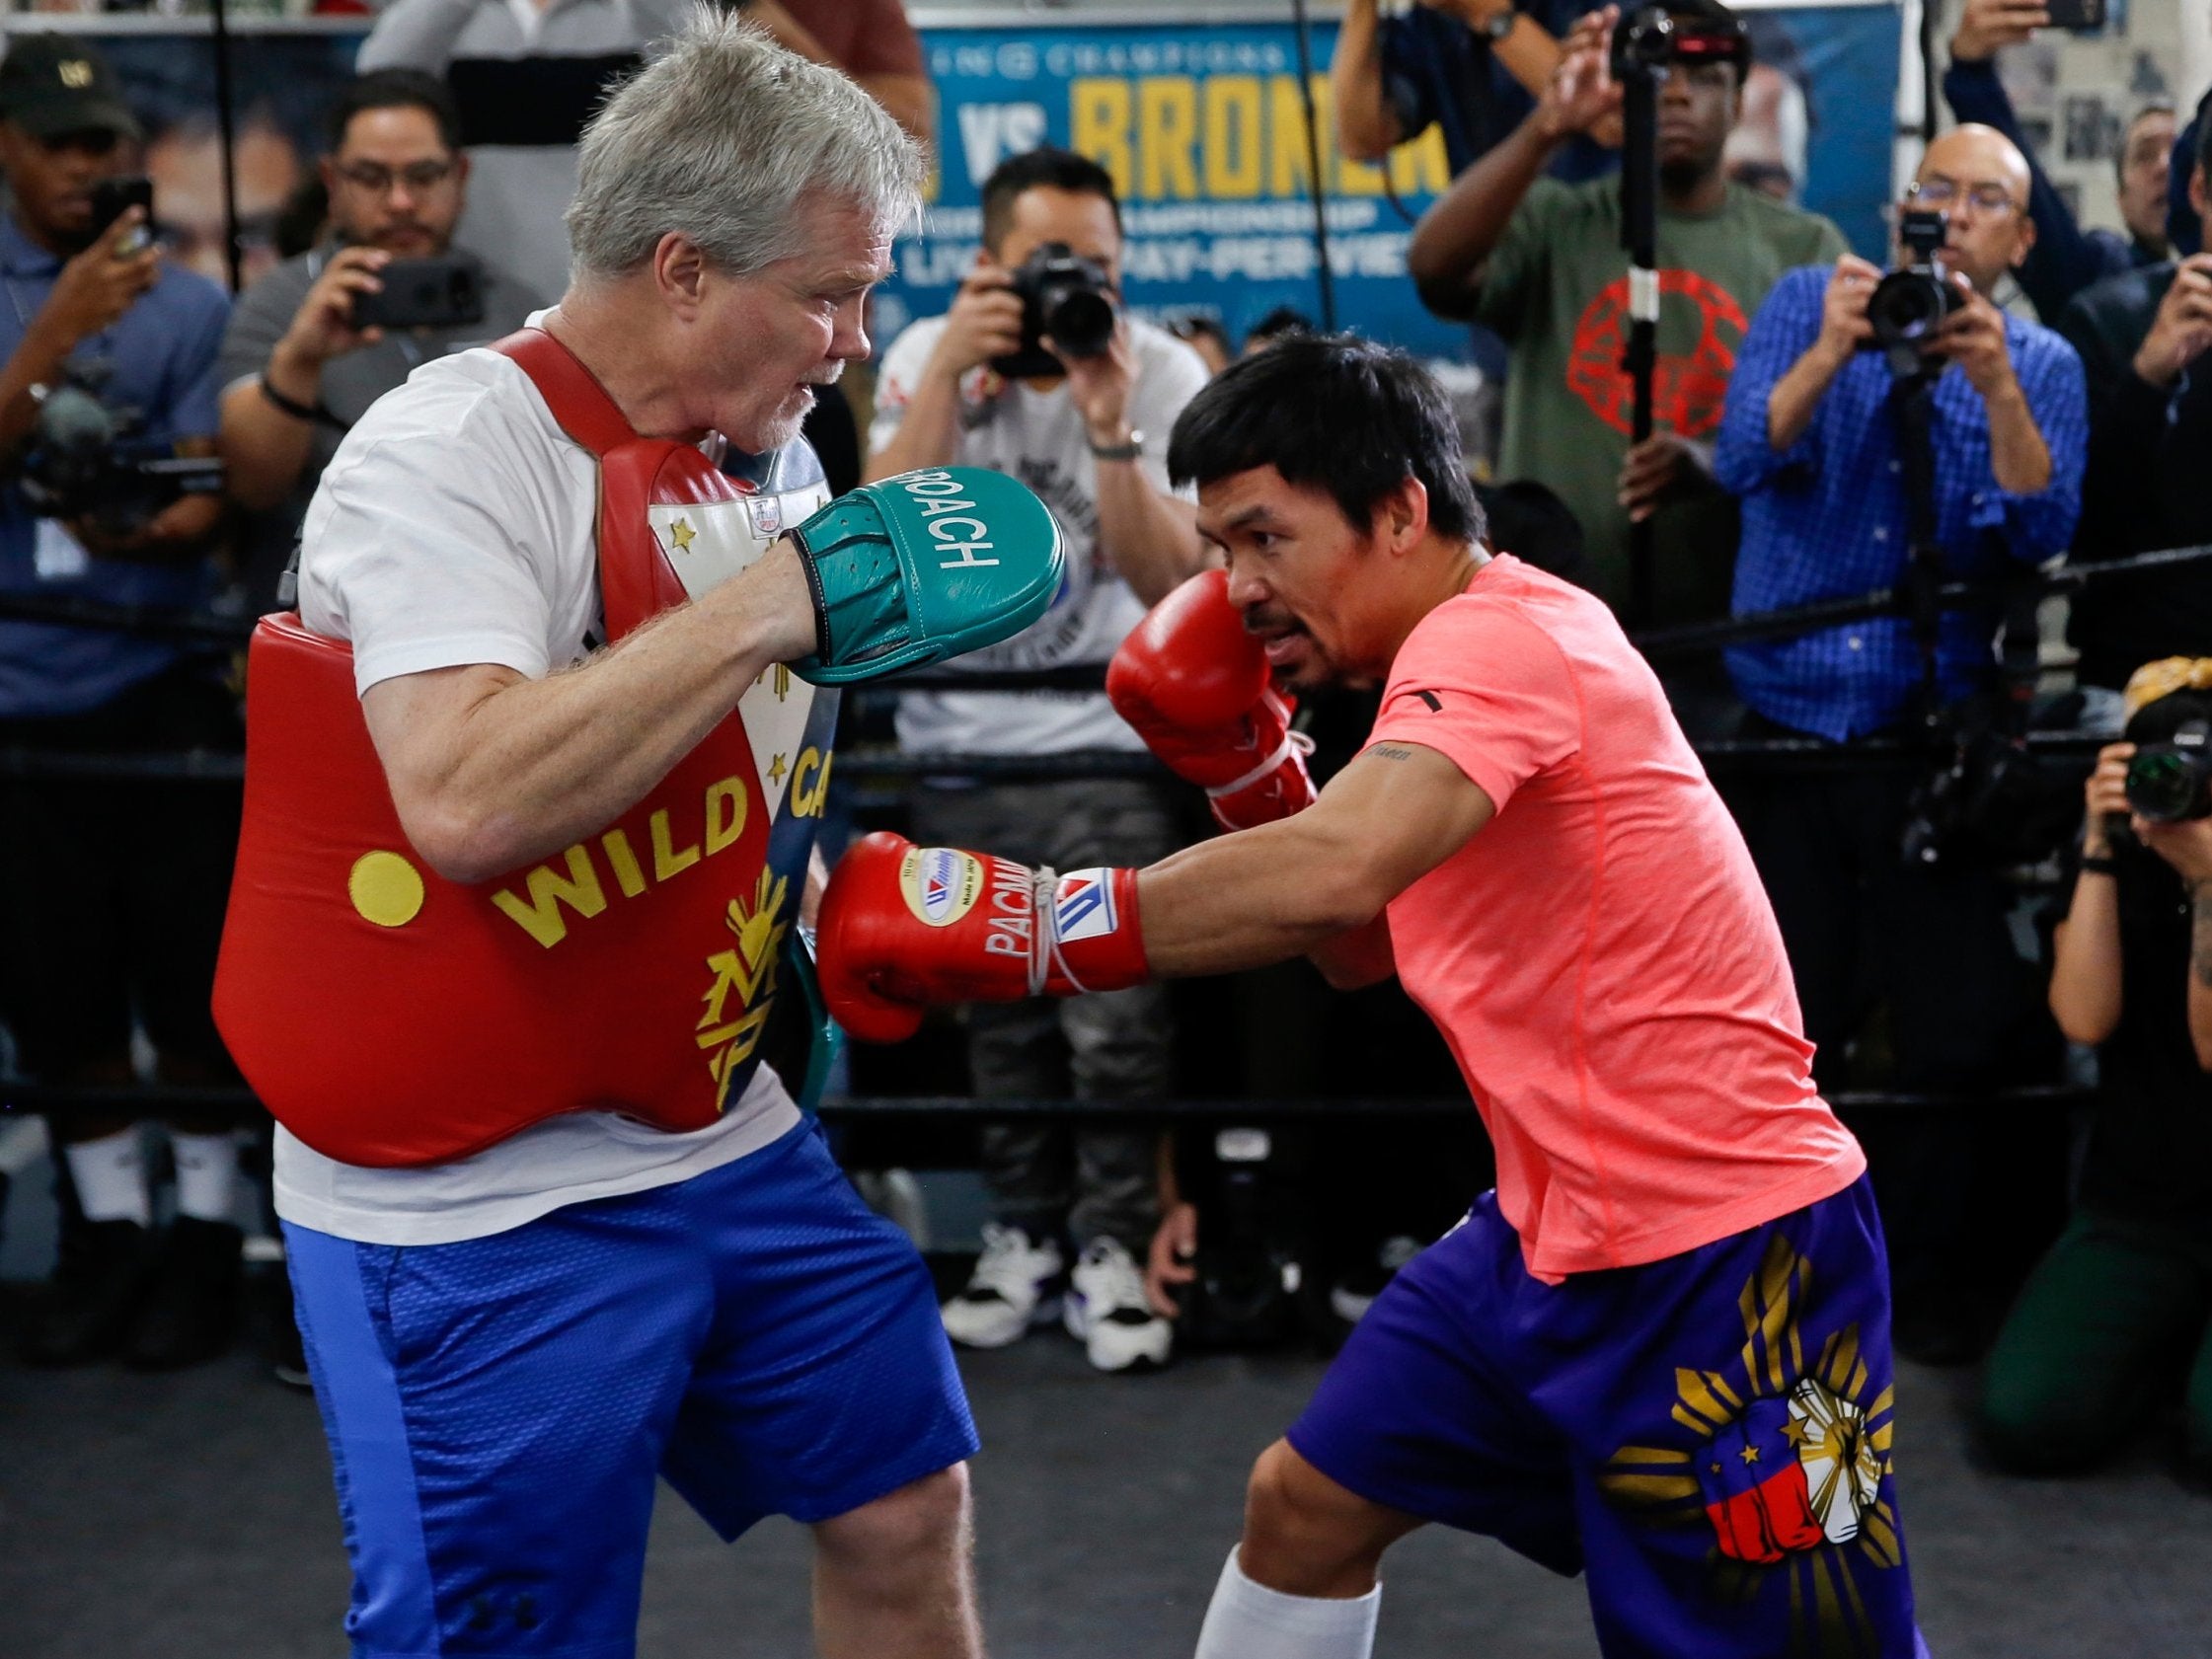 Manny Pacquiao says the fight was not good for fans